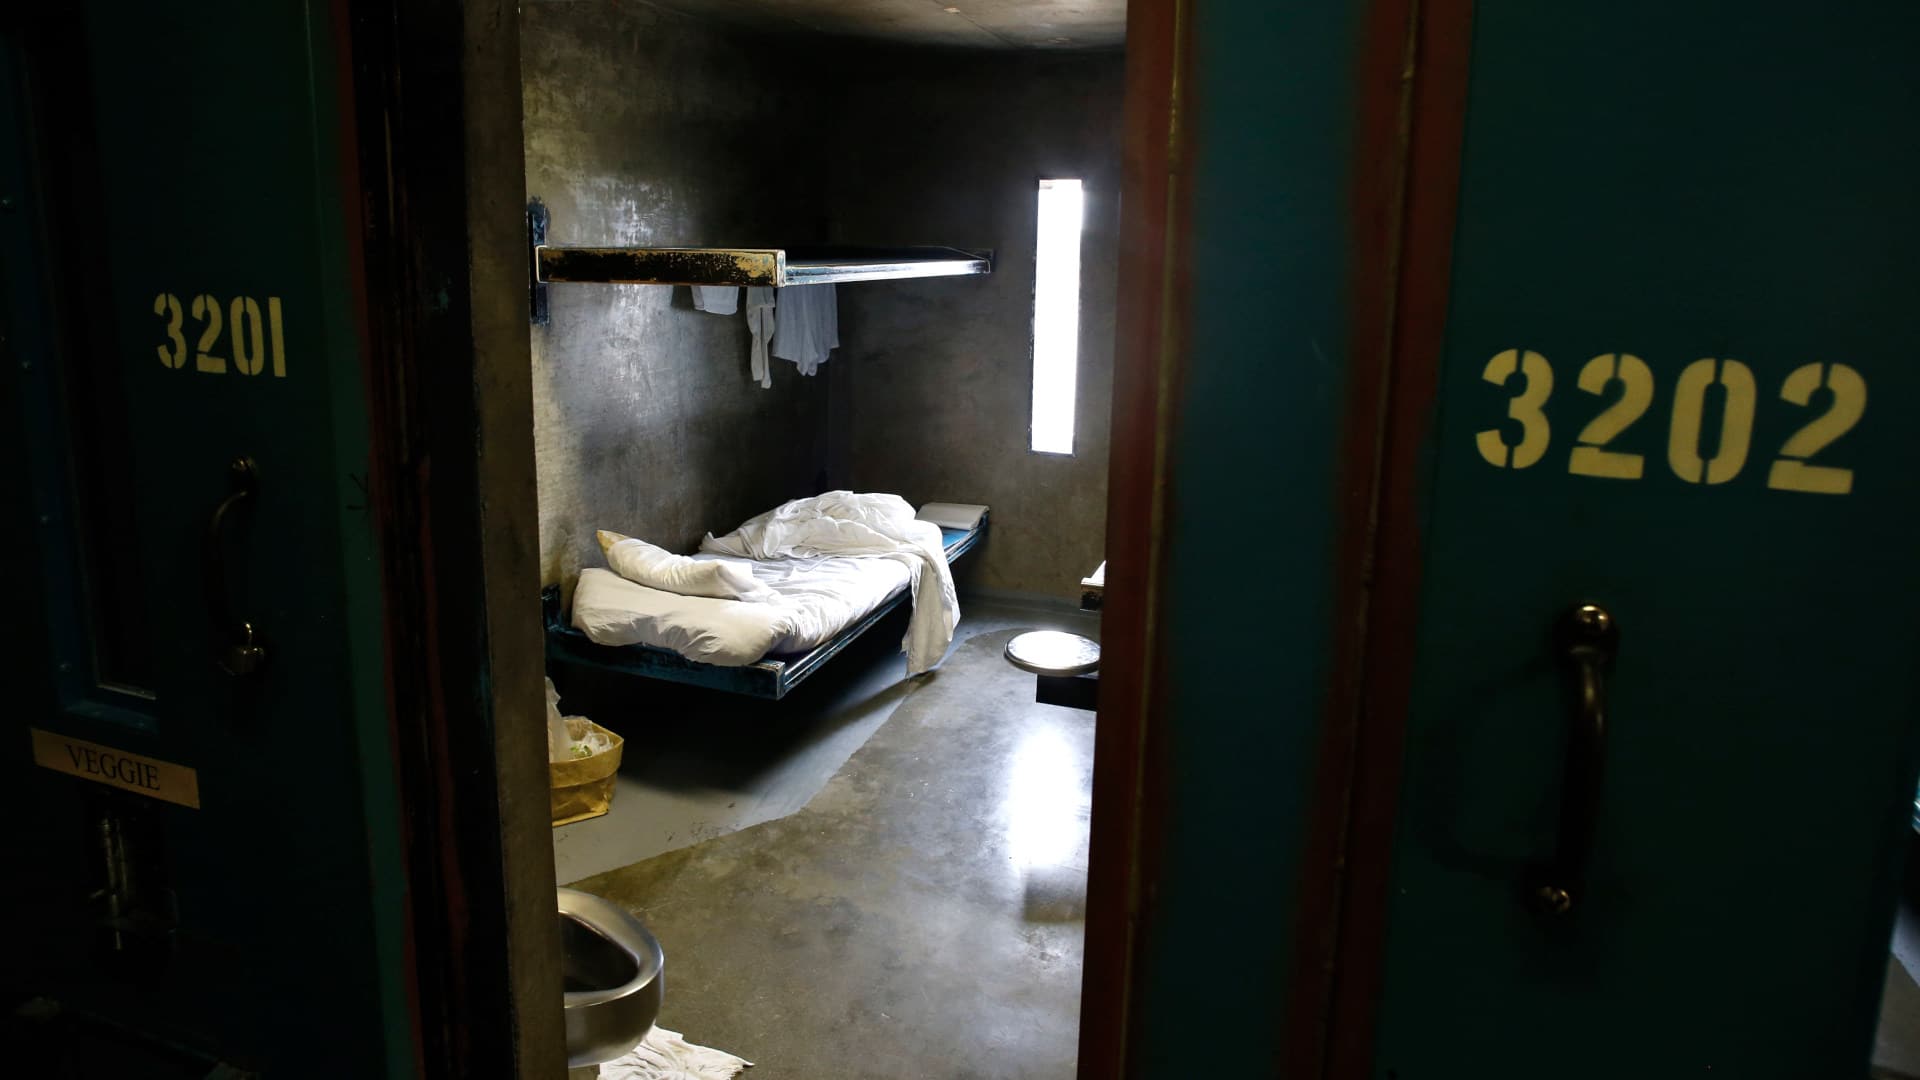 An unoccupied cell inside California State Prison Sacramento's security housing unit, which critics argue is solitary confinement.